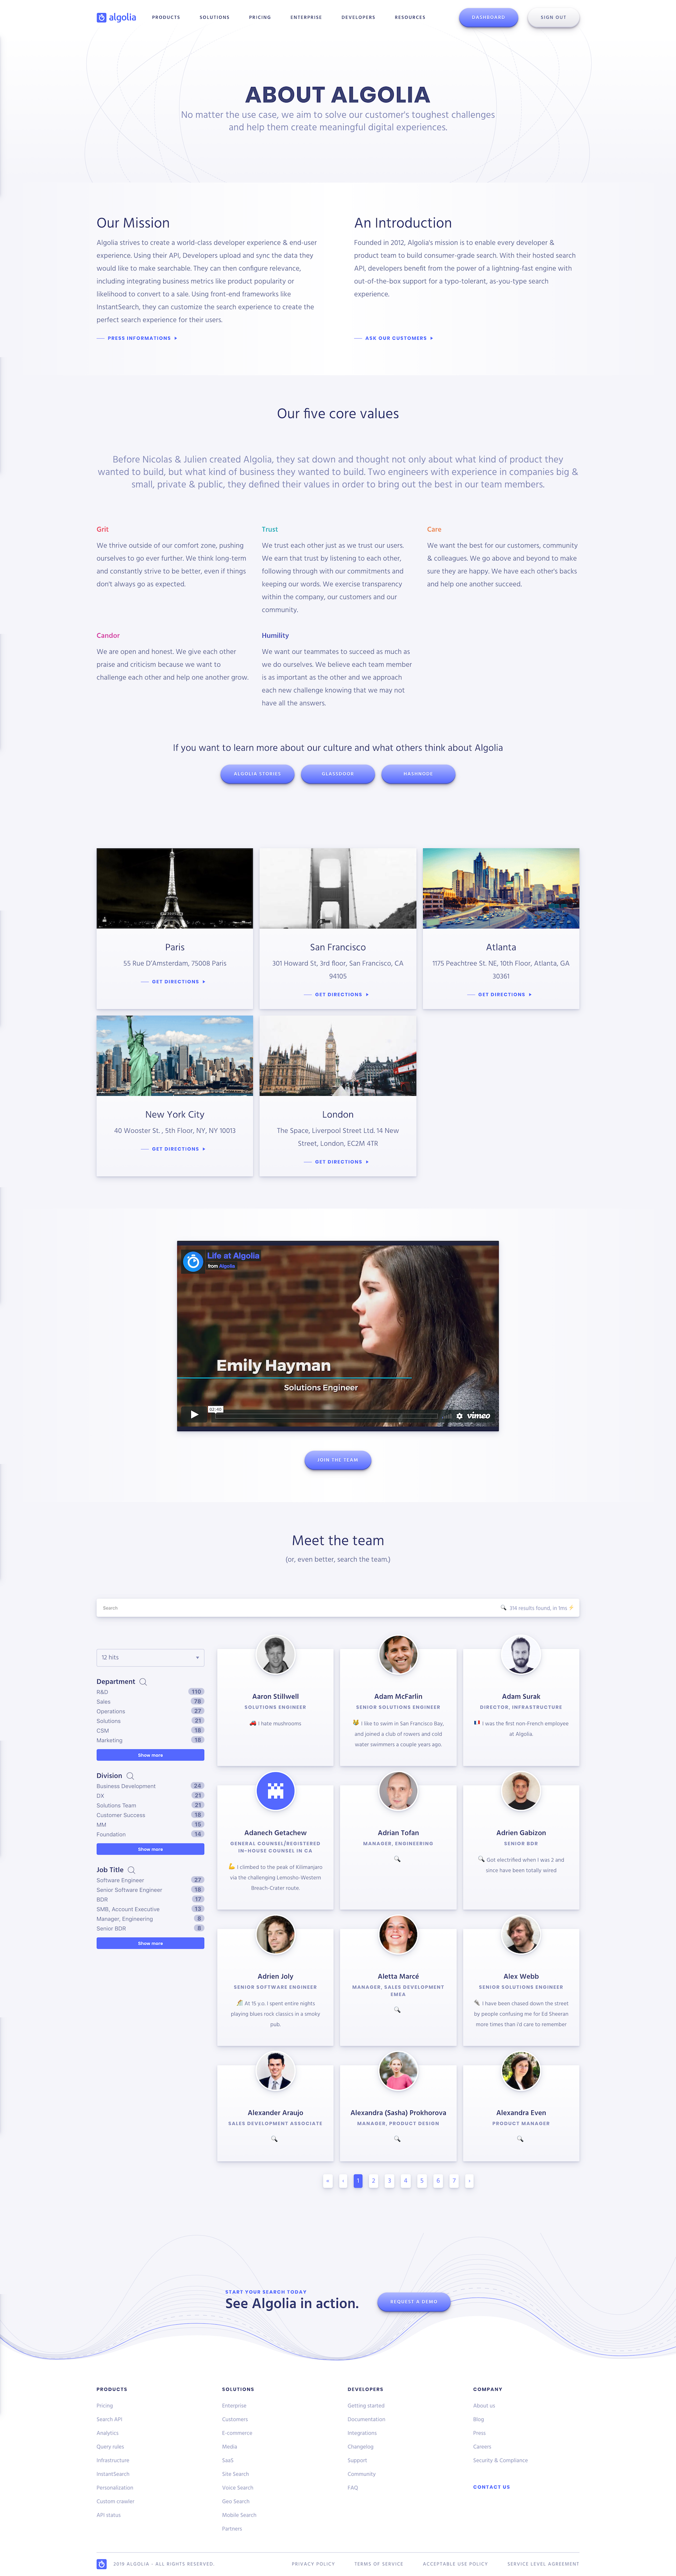 Screenshot of the About page from the Algolia website.